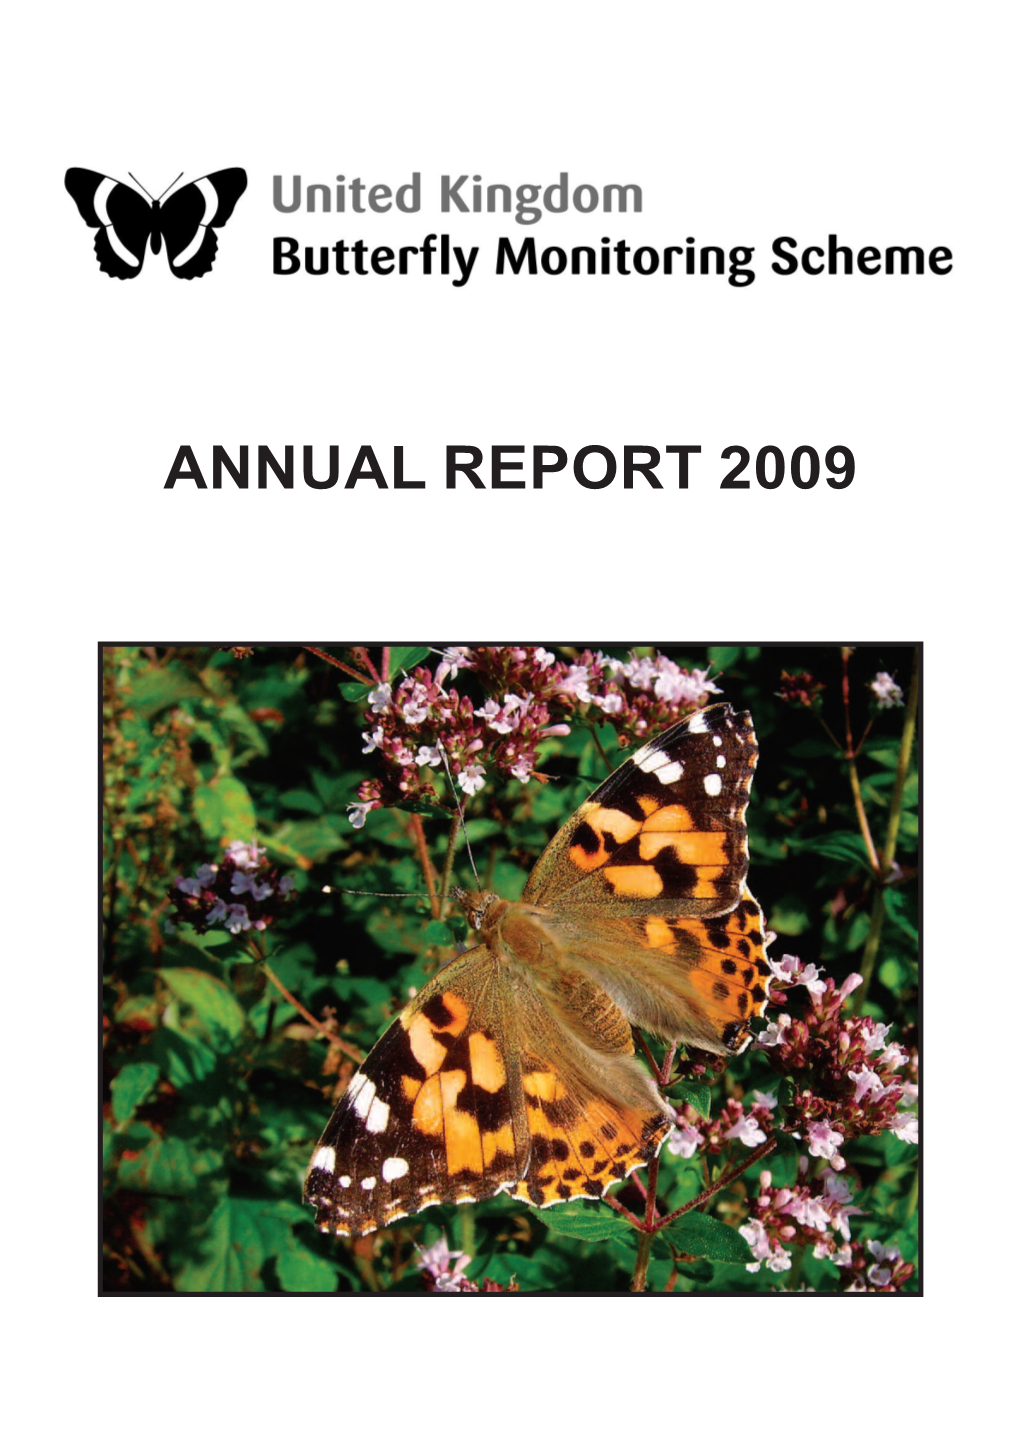 ANNUAL REPORT 2009 Tracking Changes in the Abundance of UK Butterflies